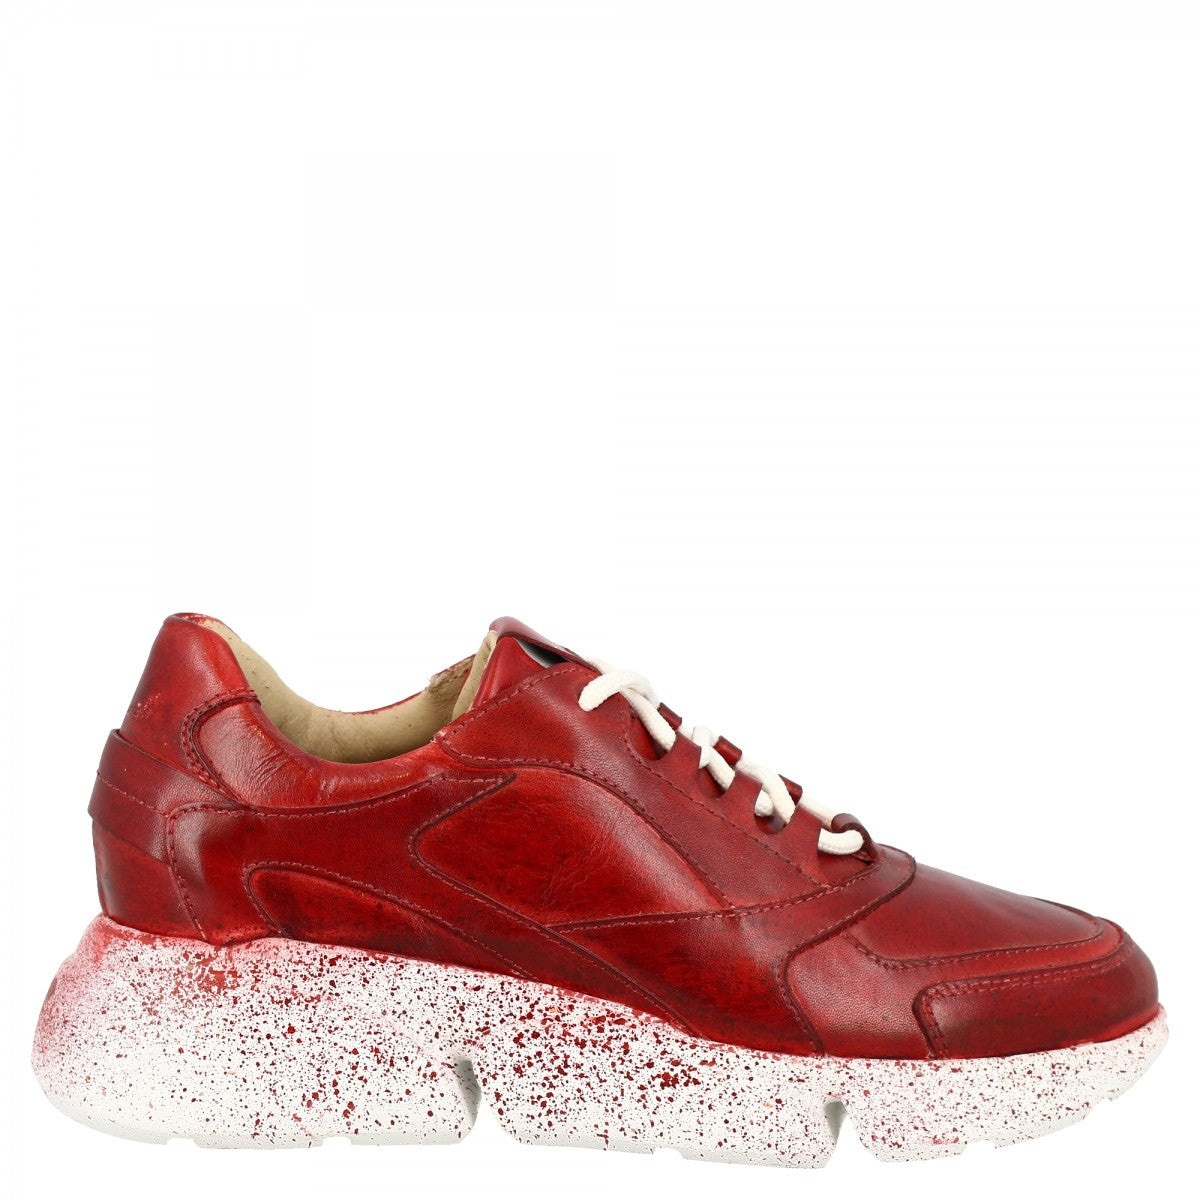 Leo's Charlot sneakers handmade in red calf leather